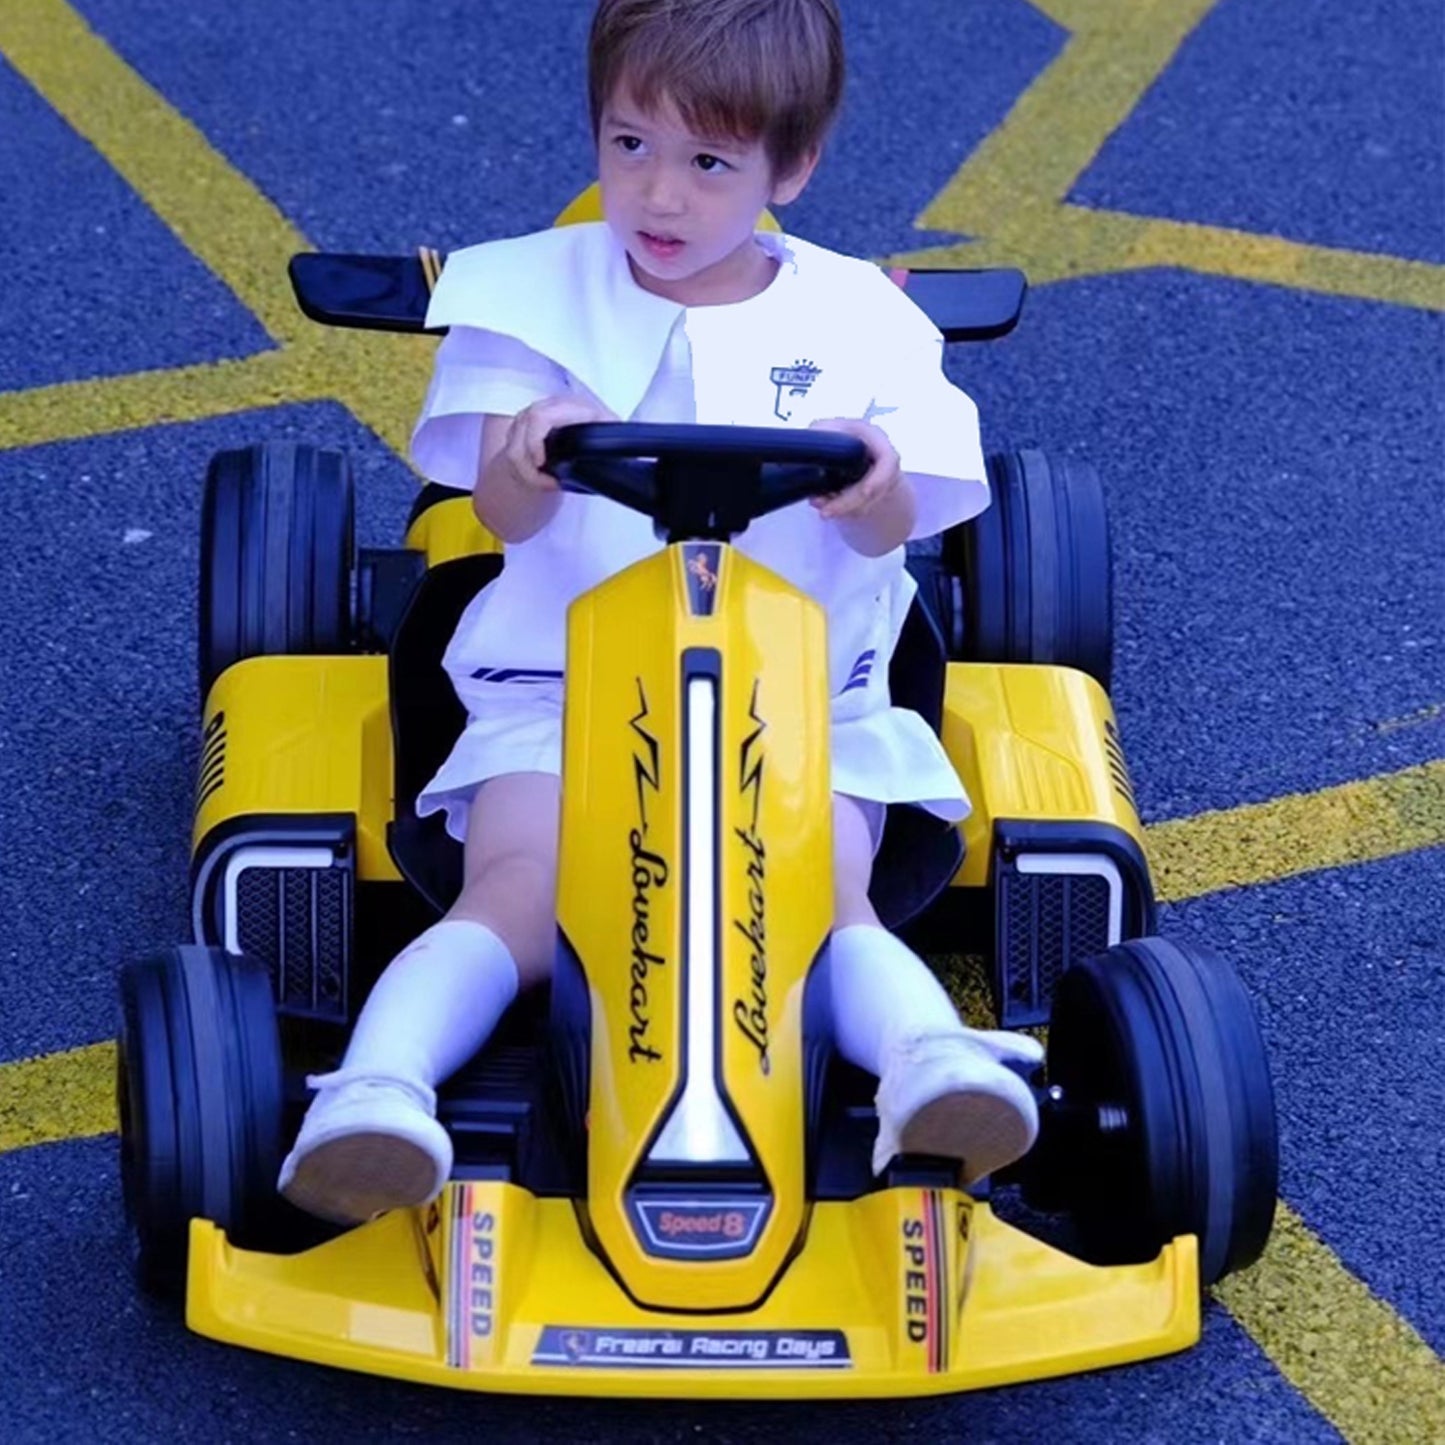 Fliptoy | electric go kart 12V | ride on toy | battery operated cars for 8 year old